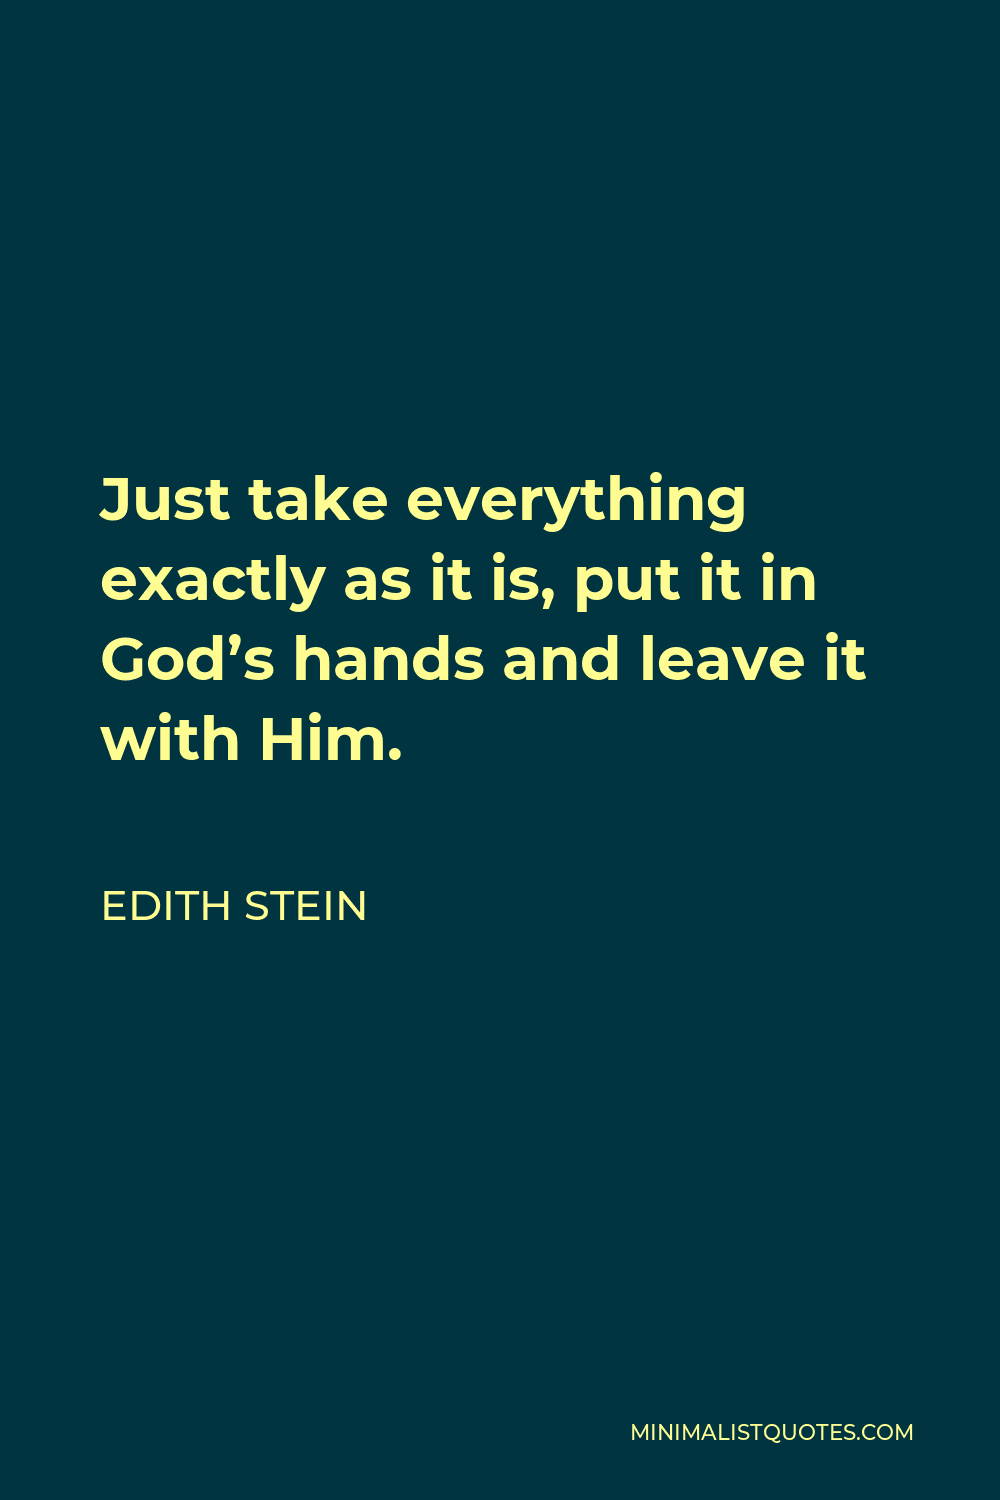 Edith Stein Quote - Just take everything exactly as it is, put it in God’s hands and leave it with Him.